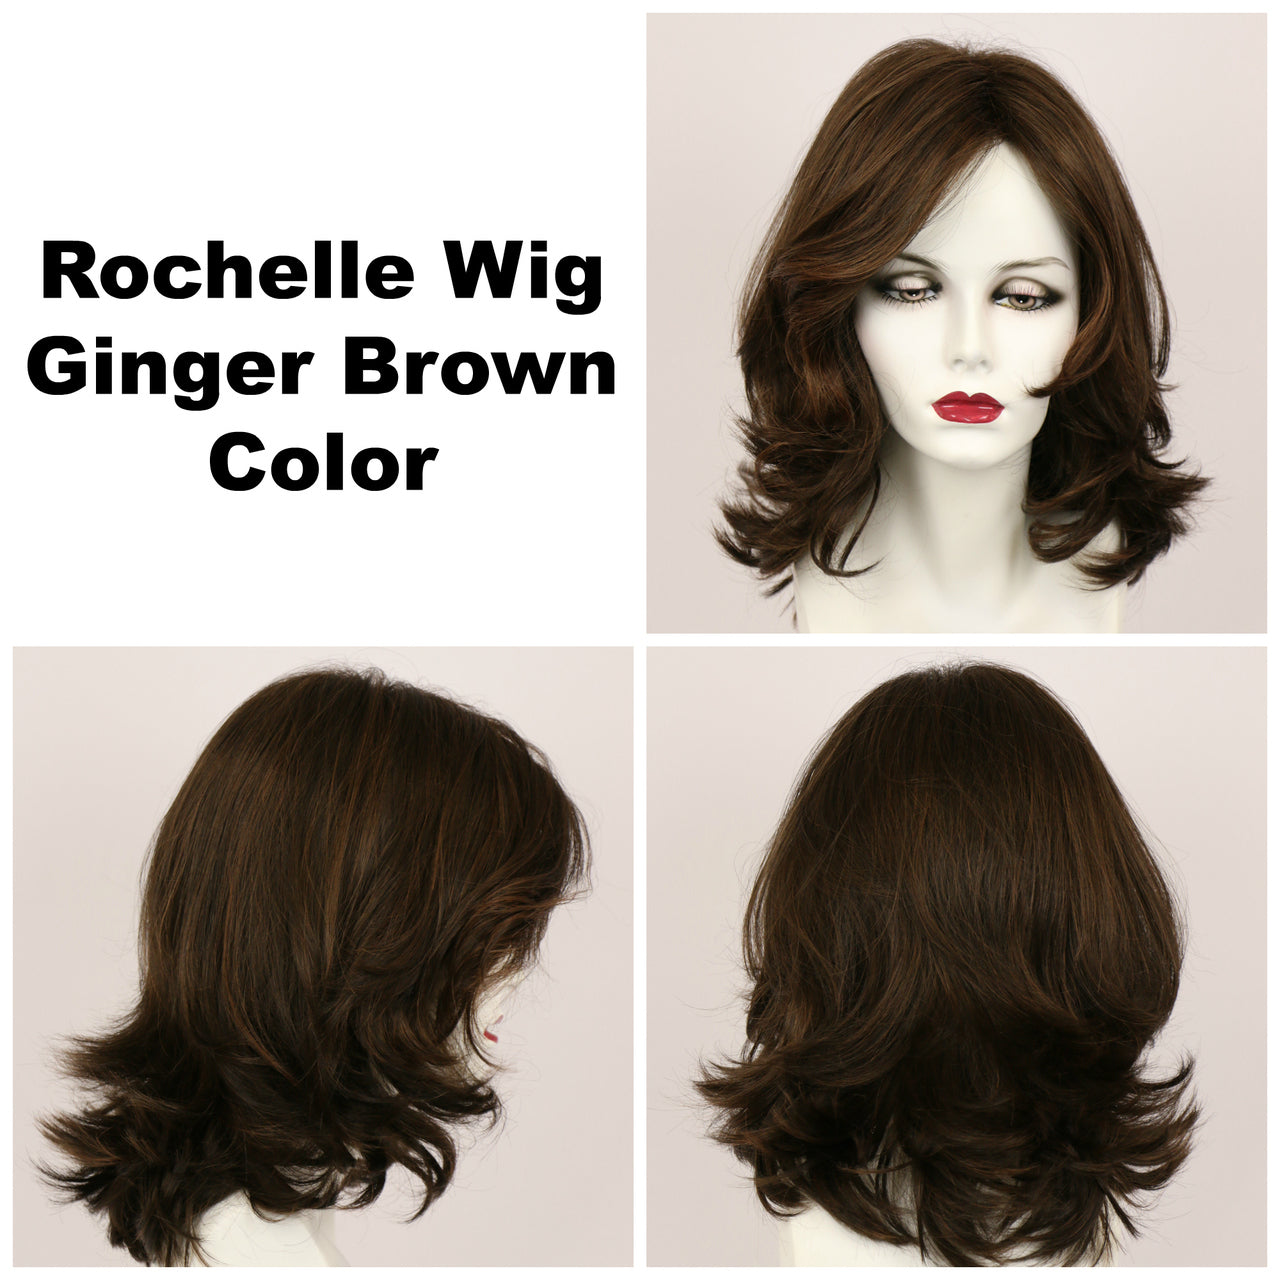 Ginger Brown / Rochelle / Long Wig